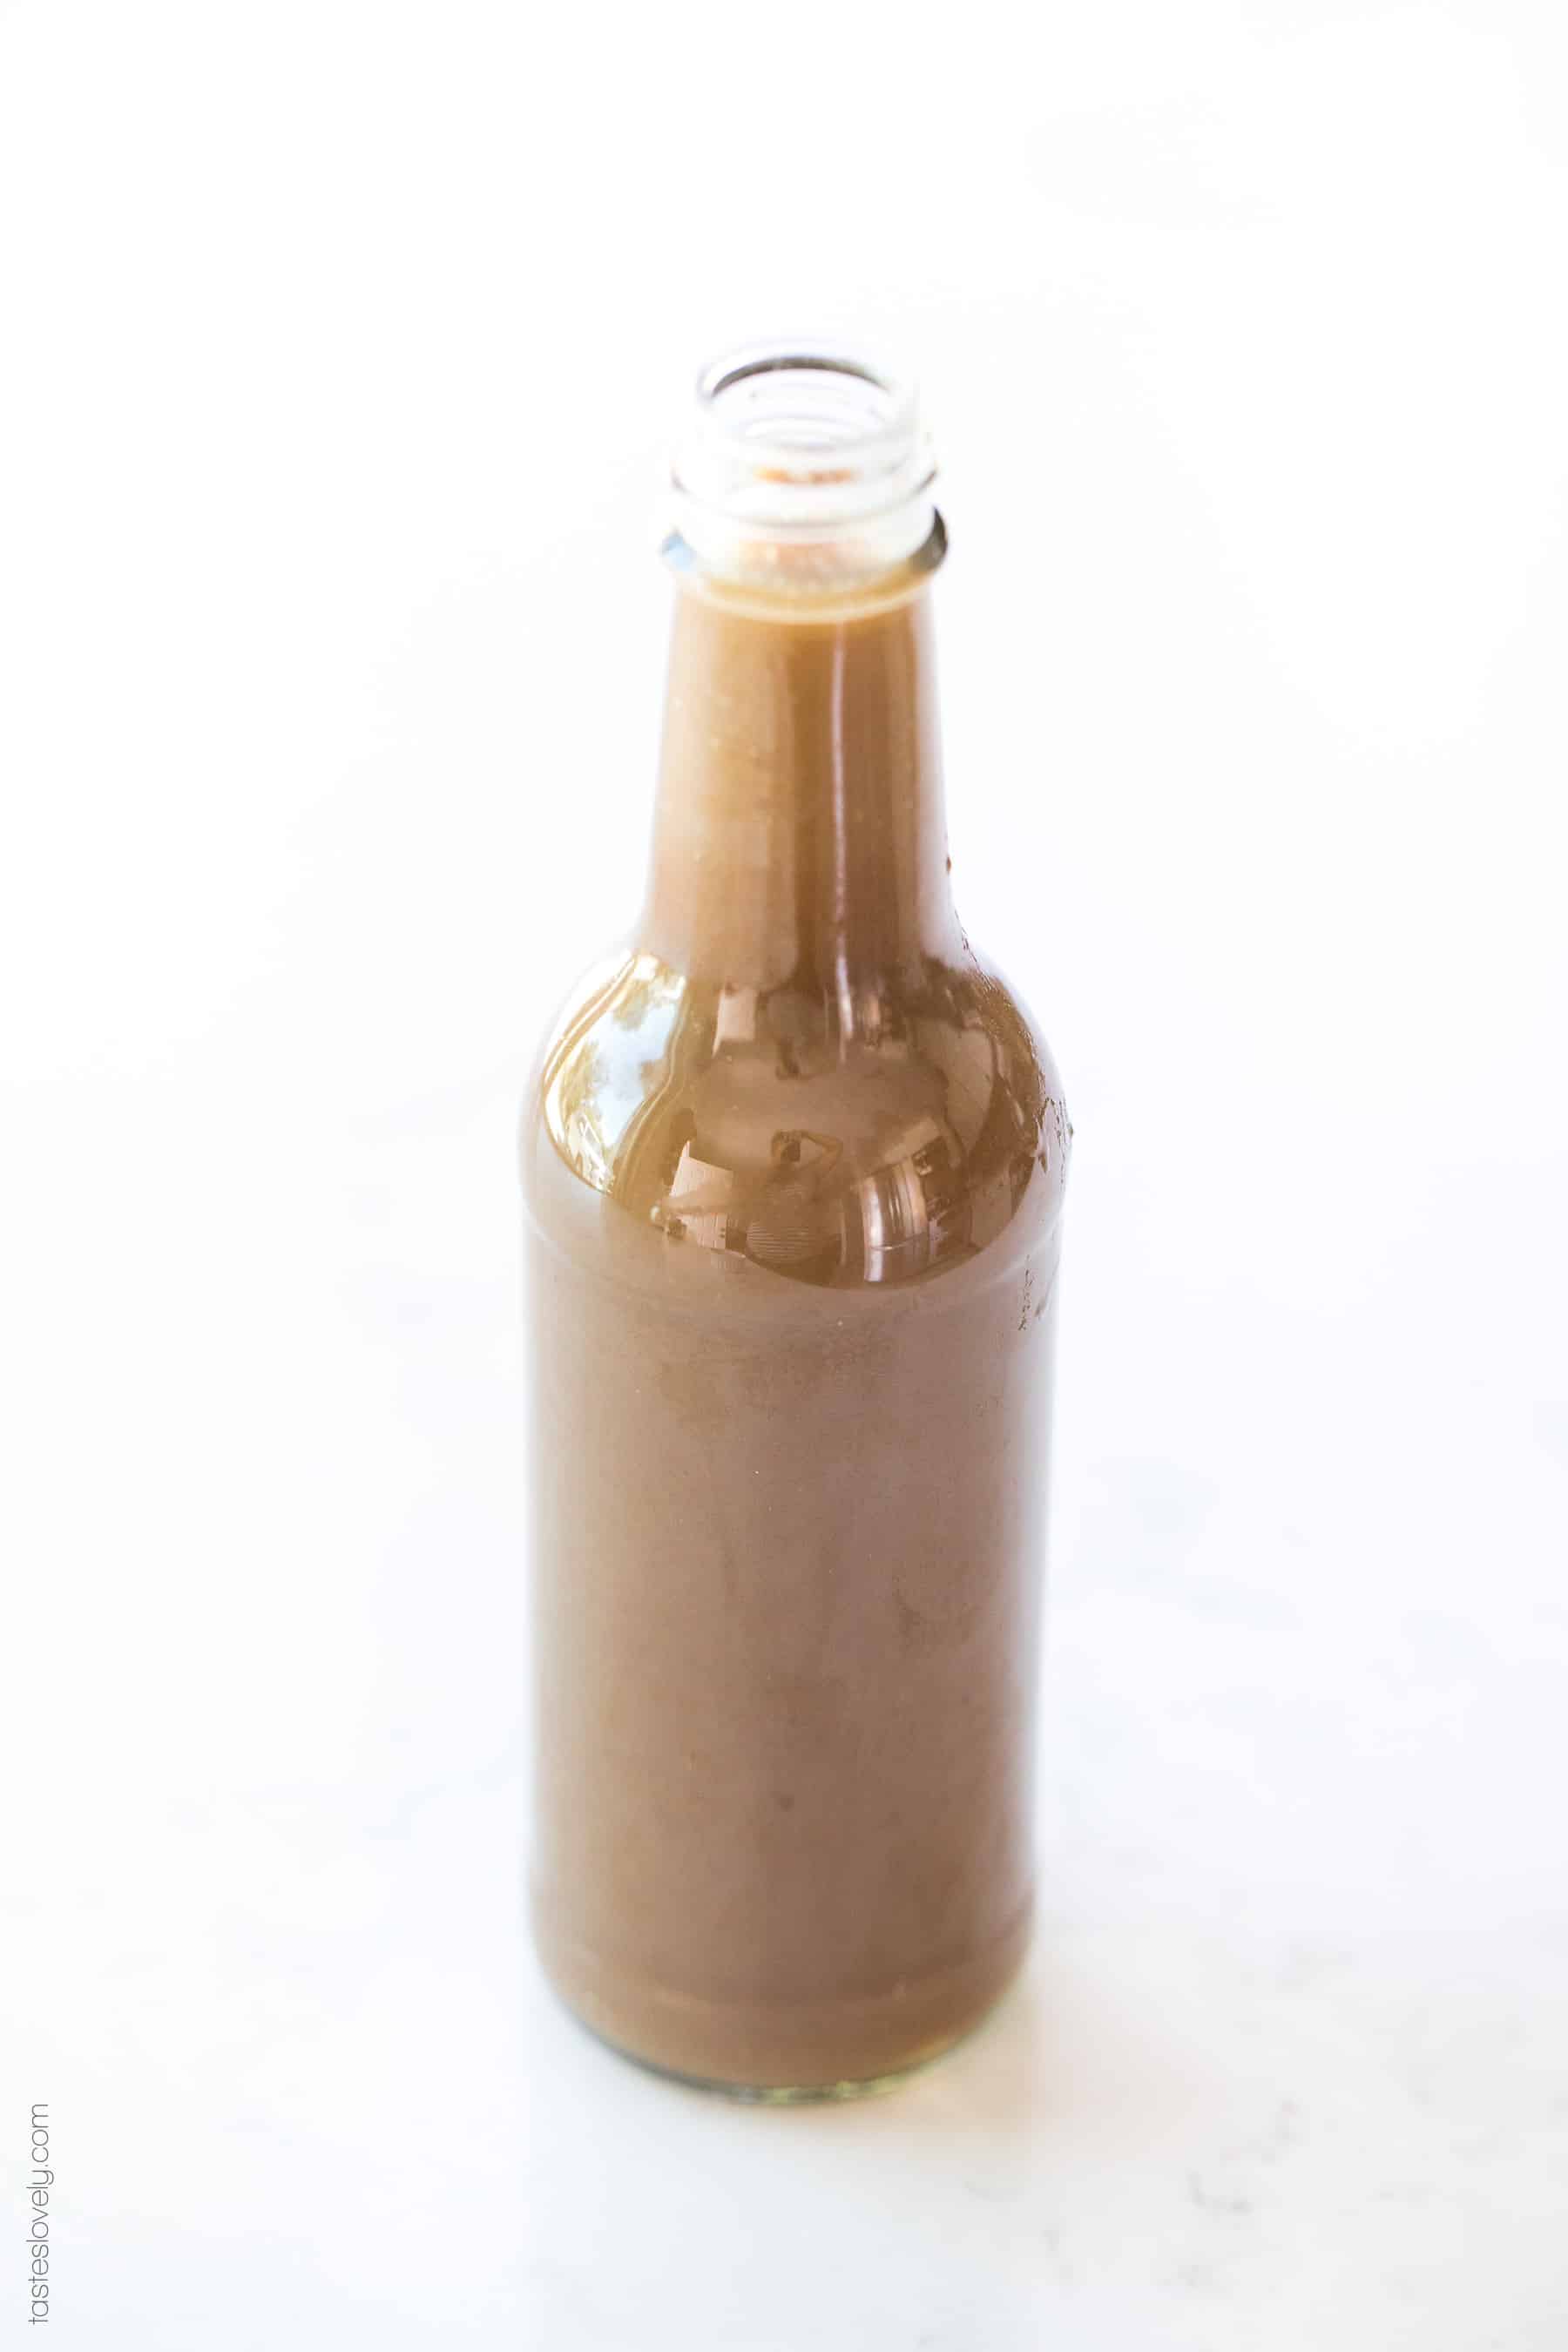 Paleo + Whole30 Homemade Worcestershire Sauce Recipe - tastes exactly like the real deal but sugar free and soy free! Made with coconut aminos and dates. #paleo #whole30 #glutenfree #grainfree #soyfree #sugarfree